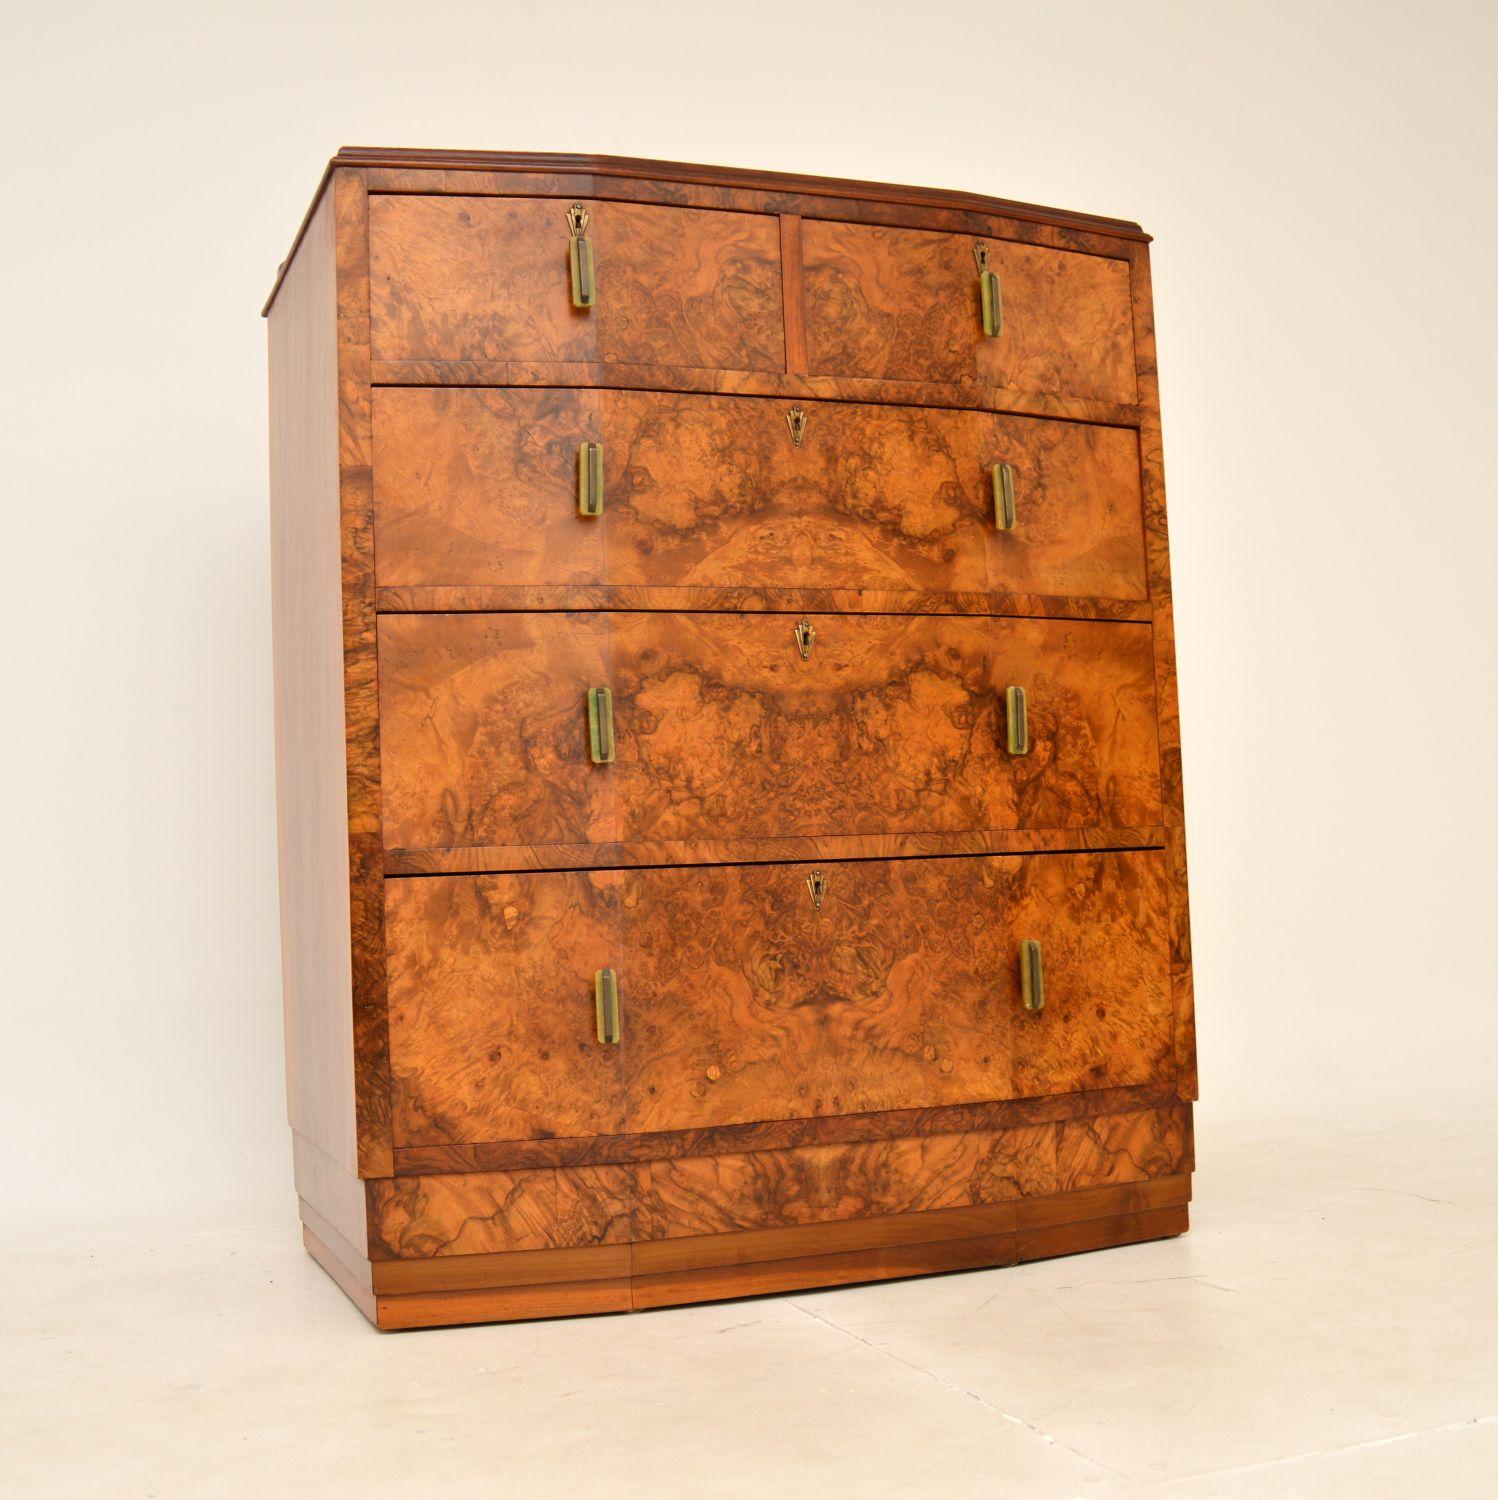 A stunning original Art Deco period chest of drawers of the highest order. This was made in England, it dates from the 1920-1930s.

The quality is phenomenal, this is extremely well made with a beautiful design. The walnut grain patterns are